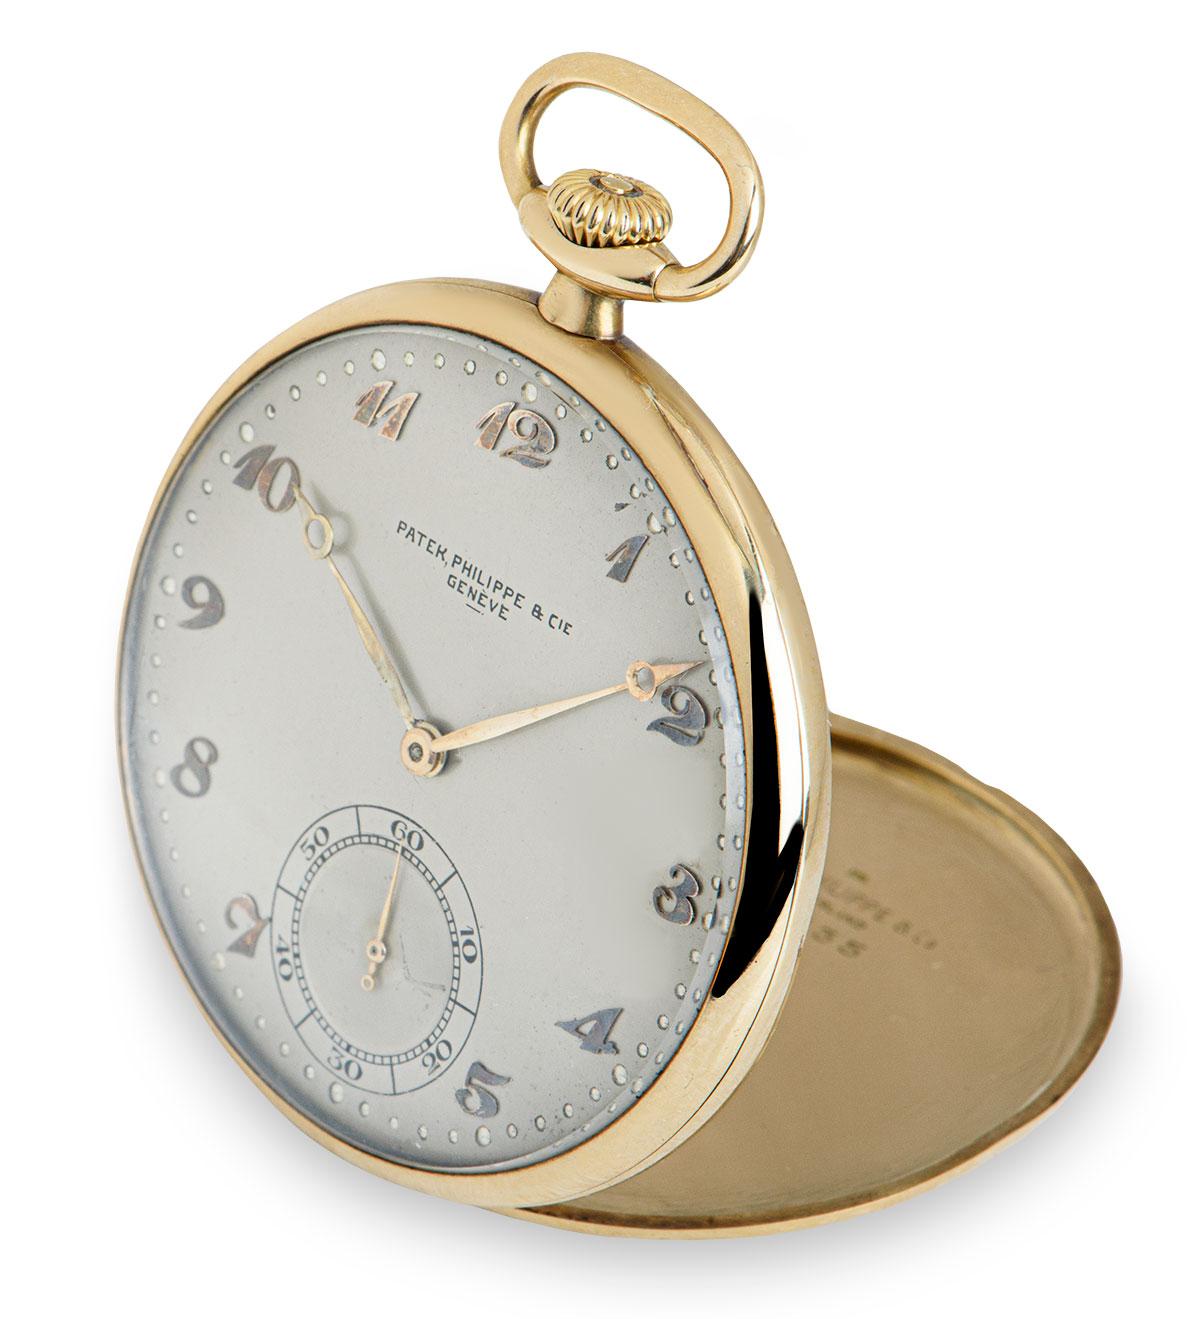 A 46 mm 18k Yellow Gold Open Face Vintage Gents Pocket Watch, silver dial with applied arabic numbers, small seconds at 6 0'clock, a fixed 18k yellow gold bezel, plastic glass, manual wind movement, in excellent condition, comes with a presentation